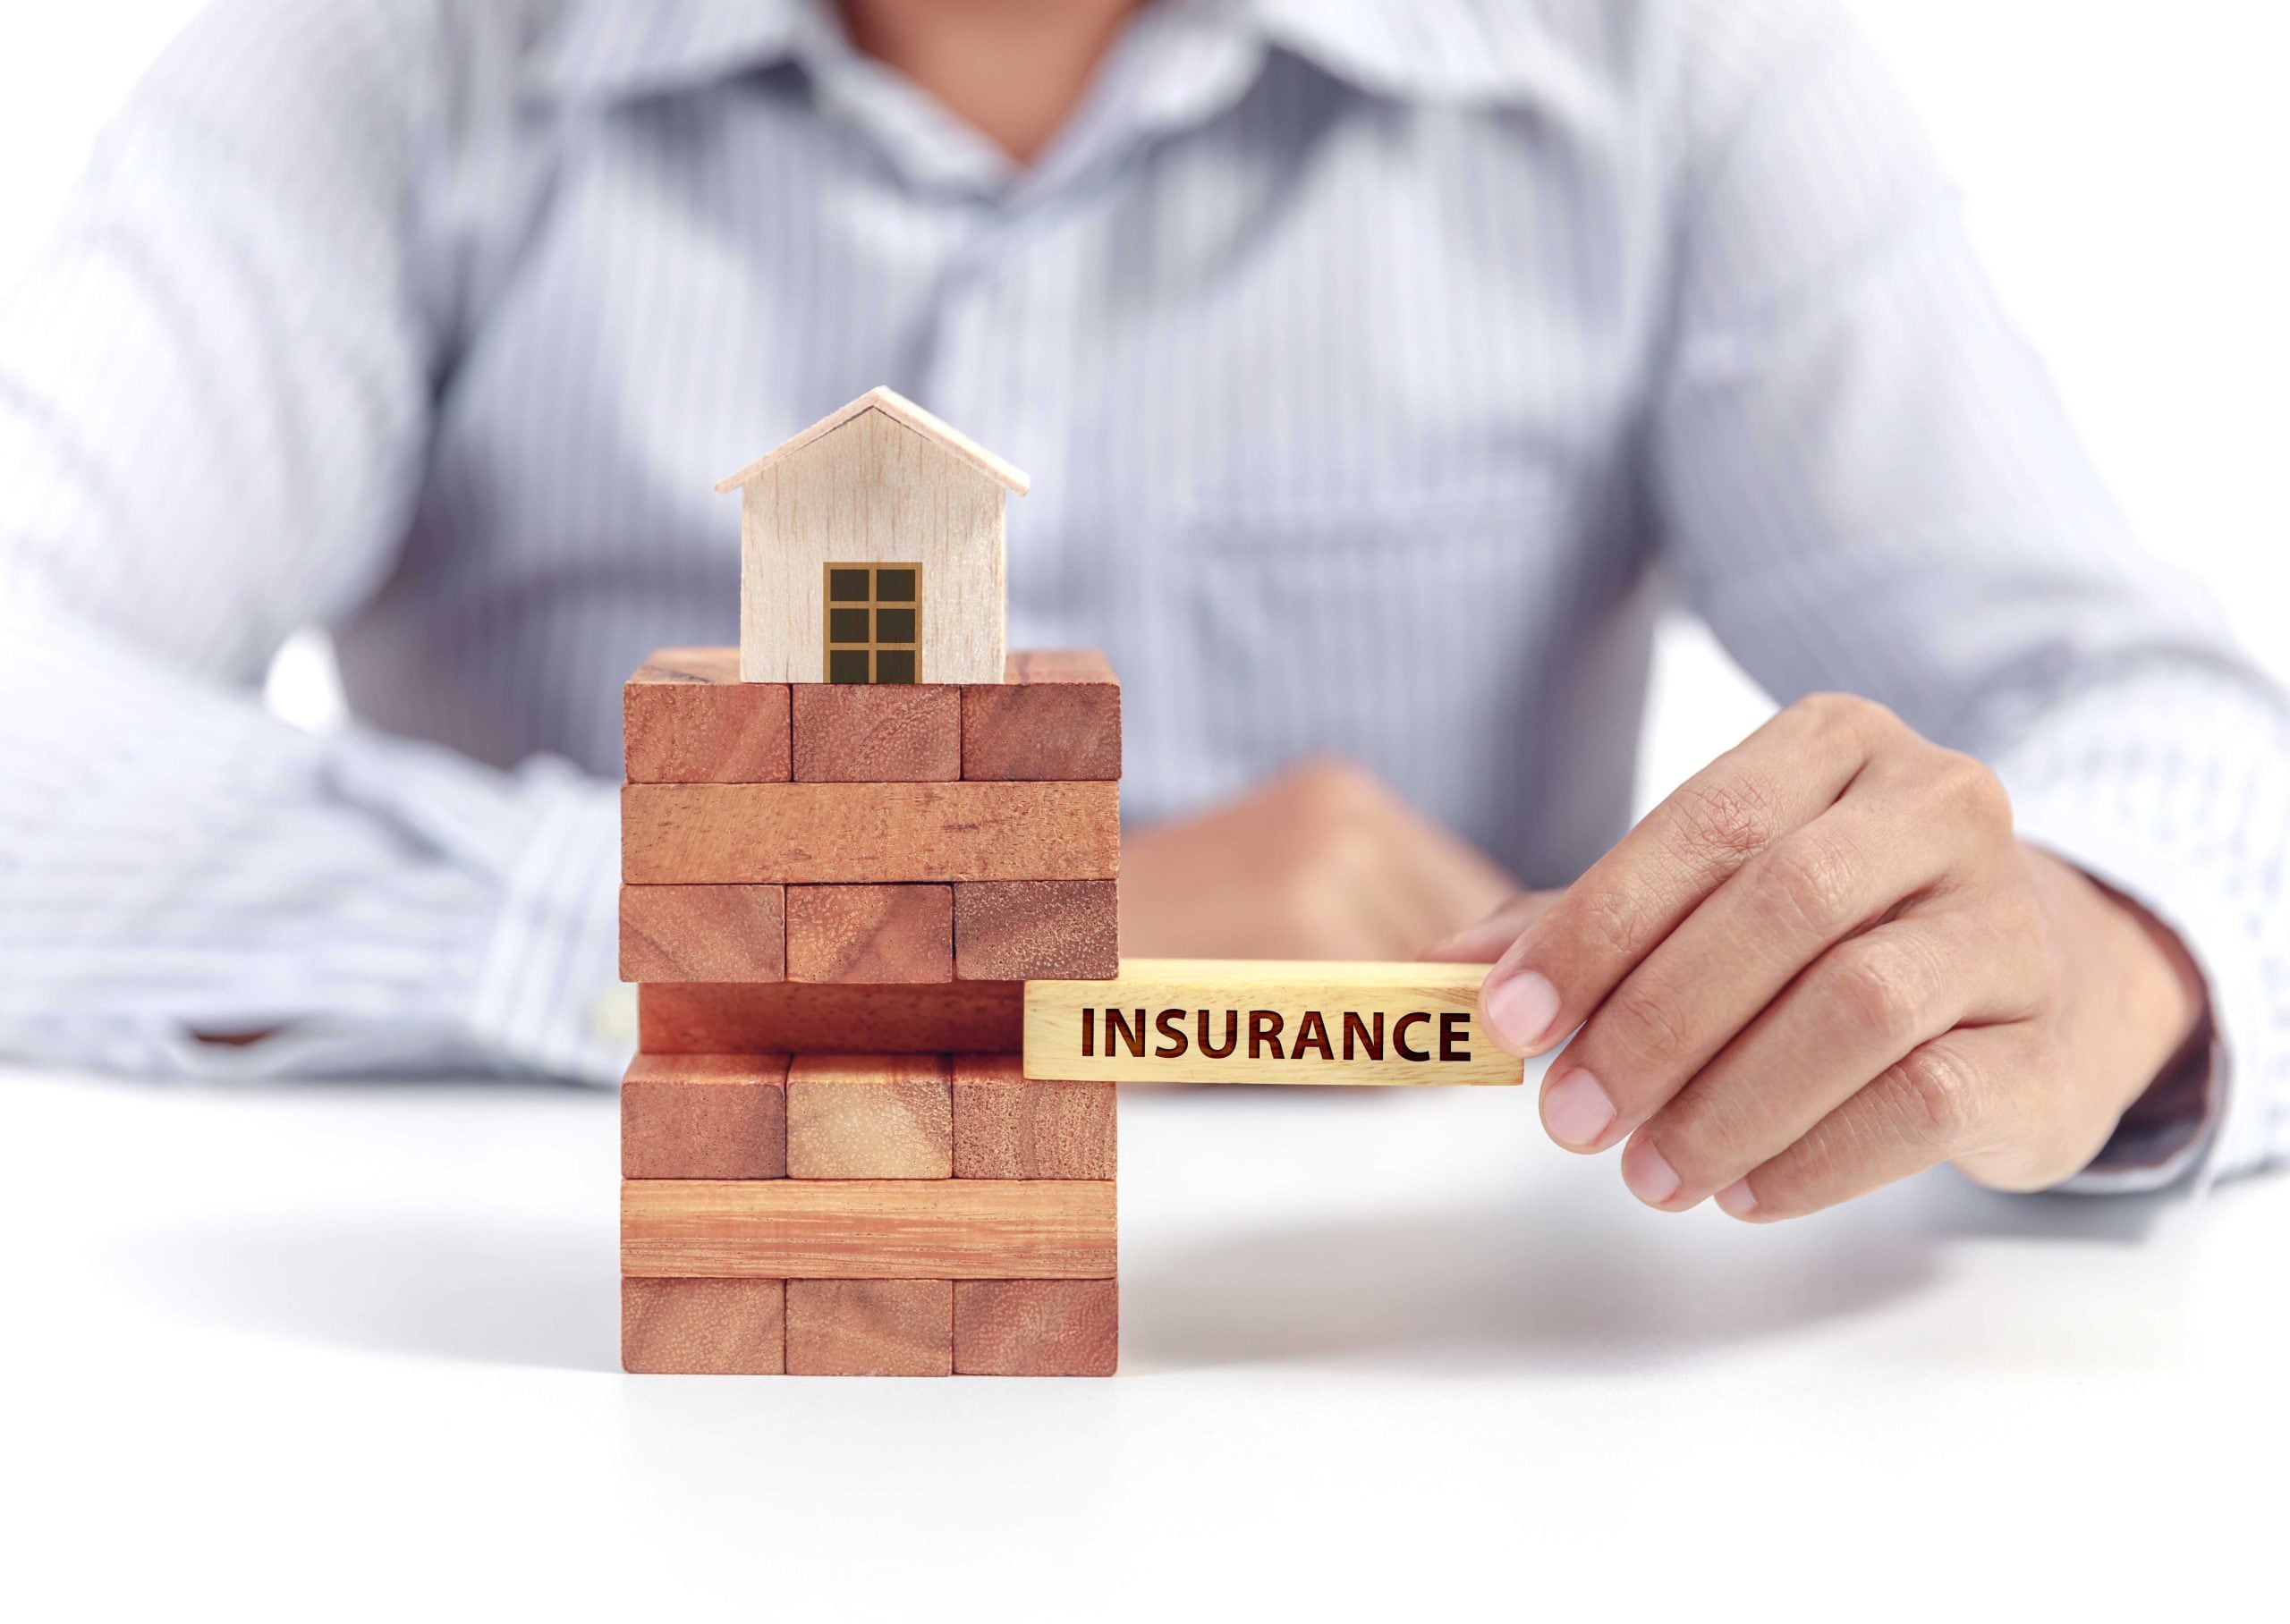 Home insurance is a type of insurance policy that provides coverage for your home and personal property against damage or loss due to various unforeseen events. This can include coverage for things like fire, theft, vandalism, and natural disasters. If you live in Odessa, TX, having home insurance is important to protect your investment in your home and belongings. In the event of an unexpected event, your insurance policy can help you recover and rebuild. Home insurance policies may vary in terms of coverage and cost, so it's important to compare different options and choose the policy that best meets your needs and budget.